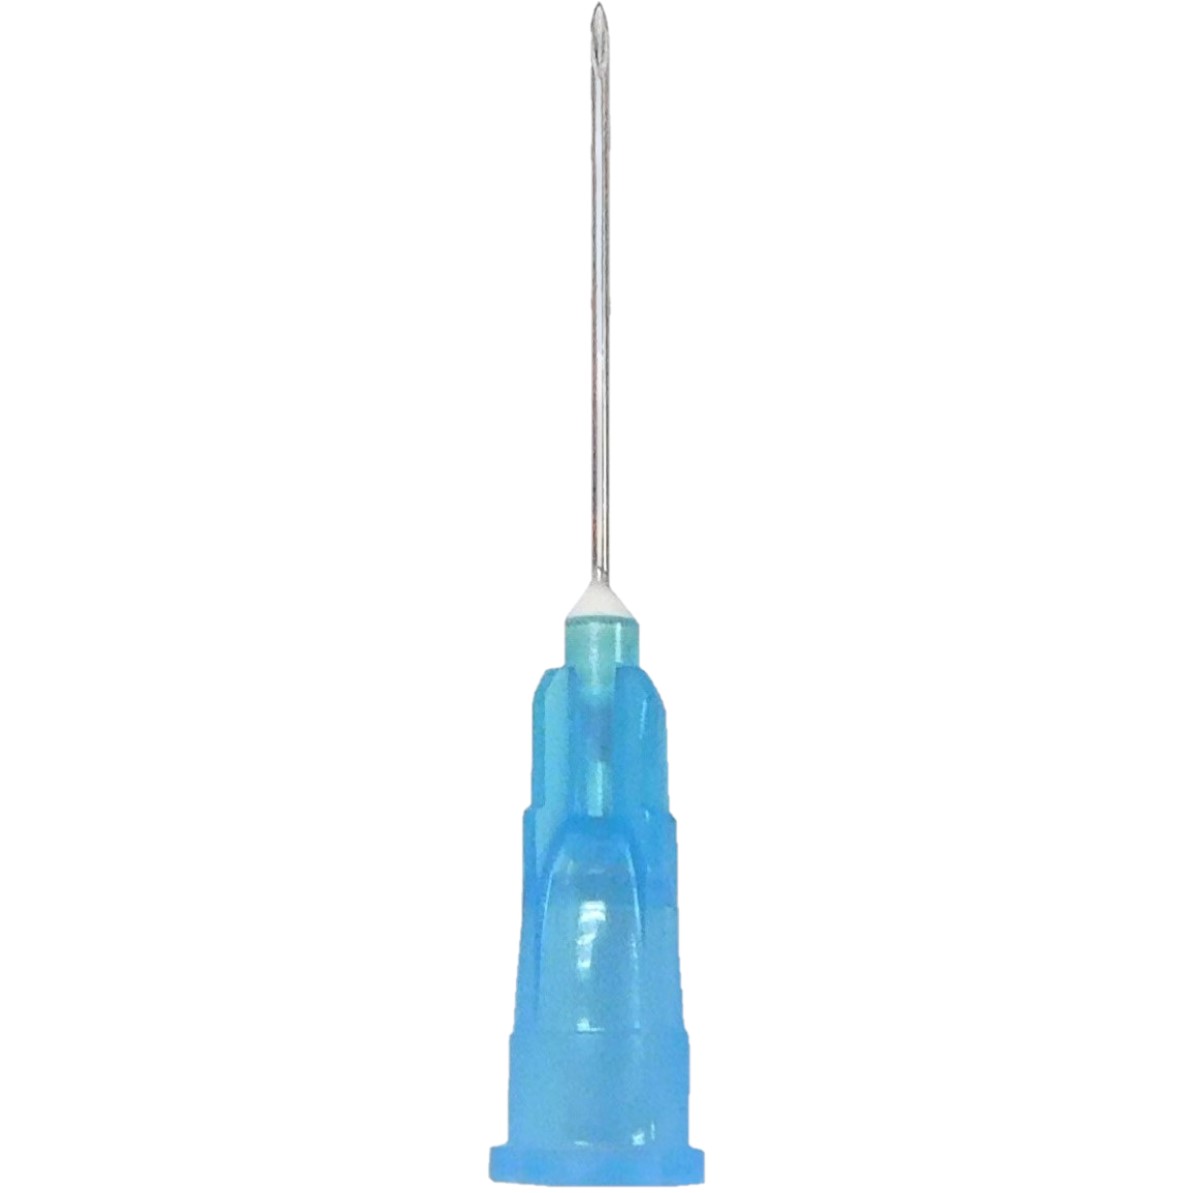 Needle Hypodermic EXEL Without Safety 23 Gauge 3 .. .  .  